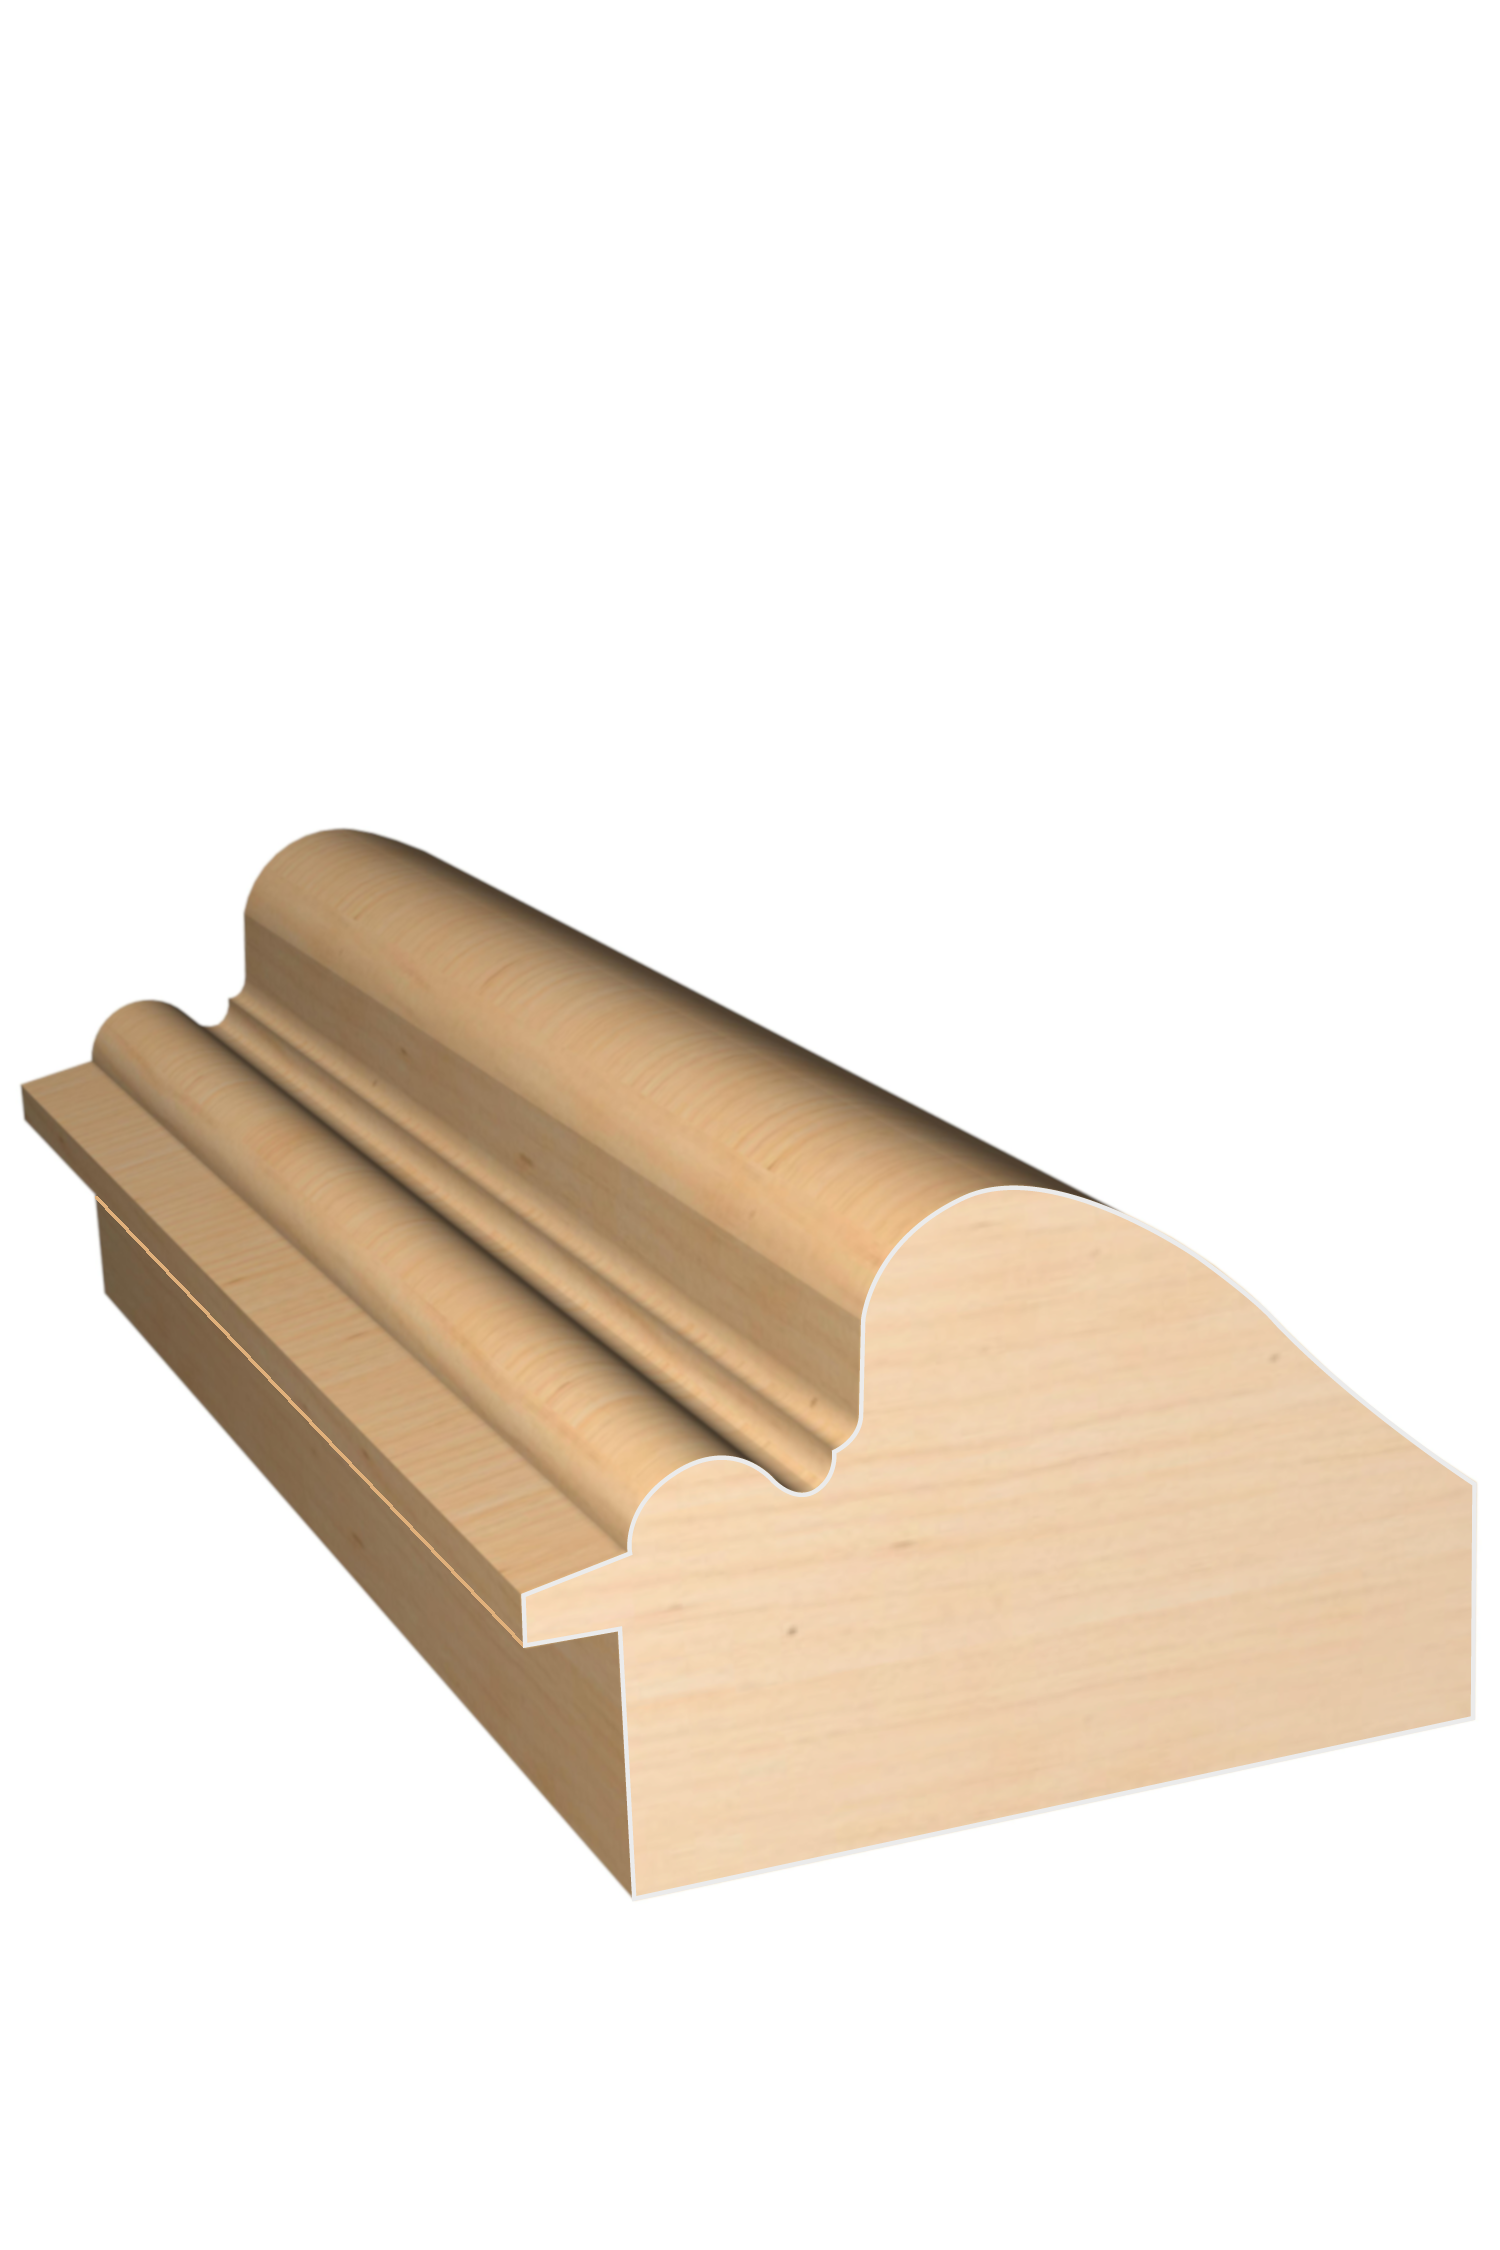 Three dimensional rendering of custom backband wood molding BBPL21 made by Public Lumber Company in Detroit.